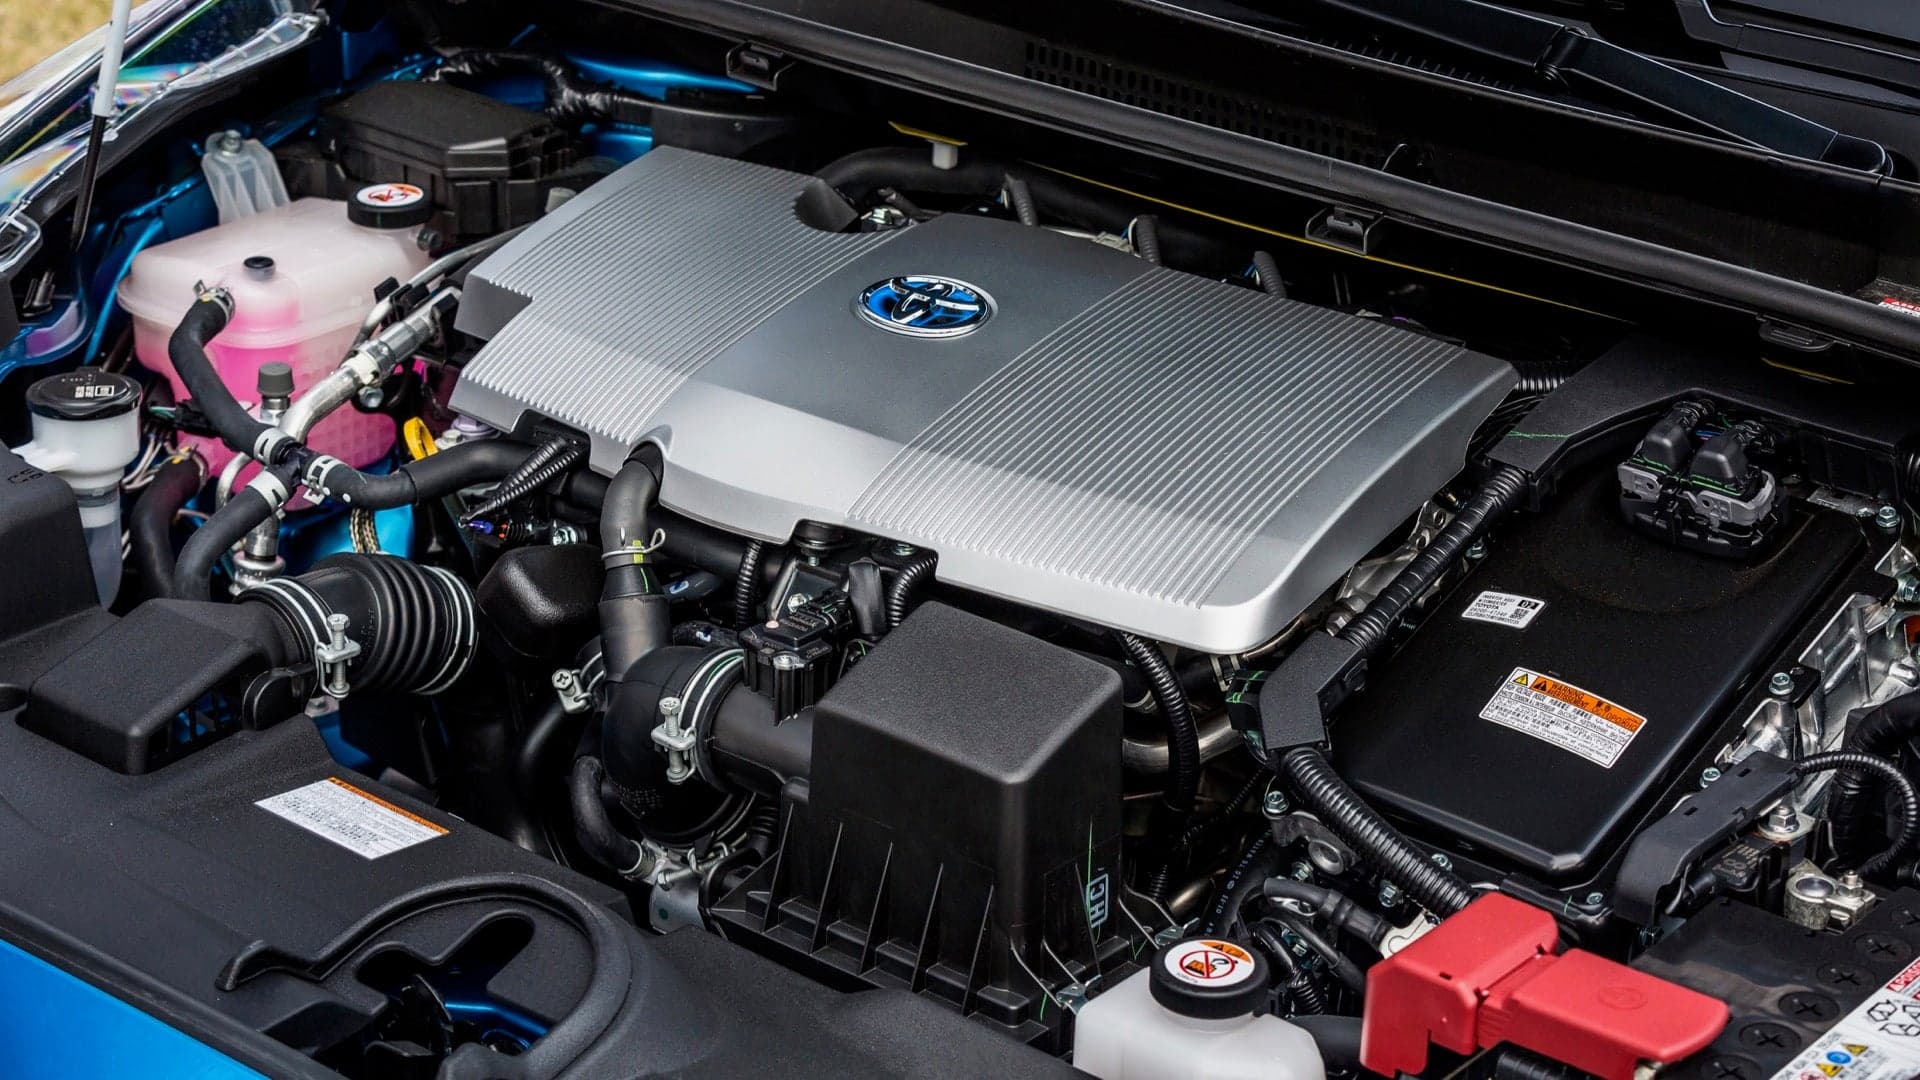 Toyota Sharing 24,000 Patents Worth of Hybrid Vehicle Knowledge With Competitors